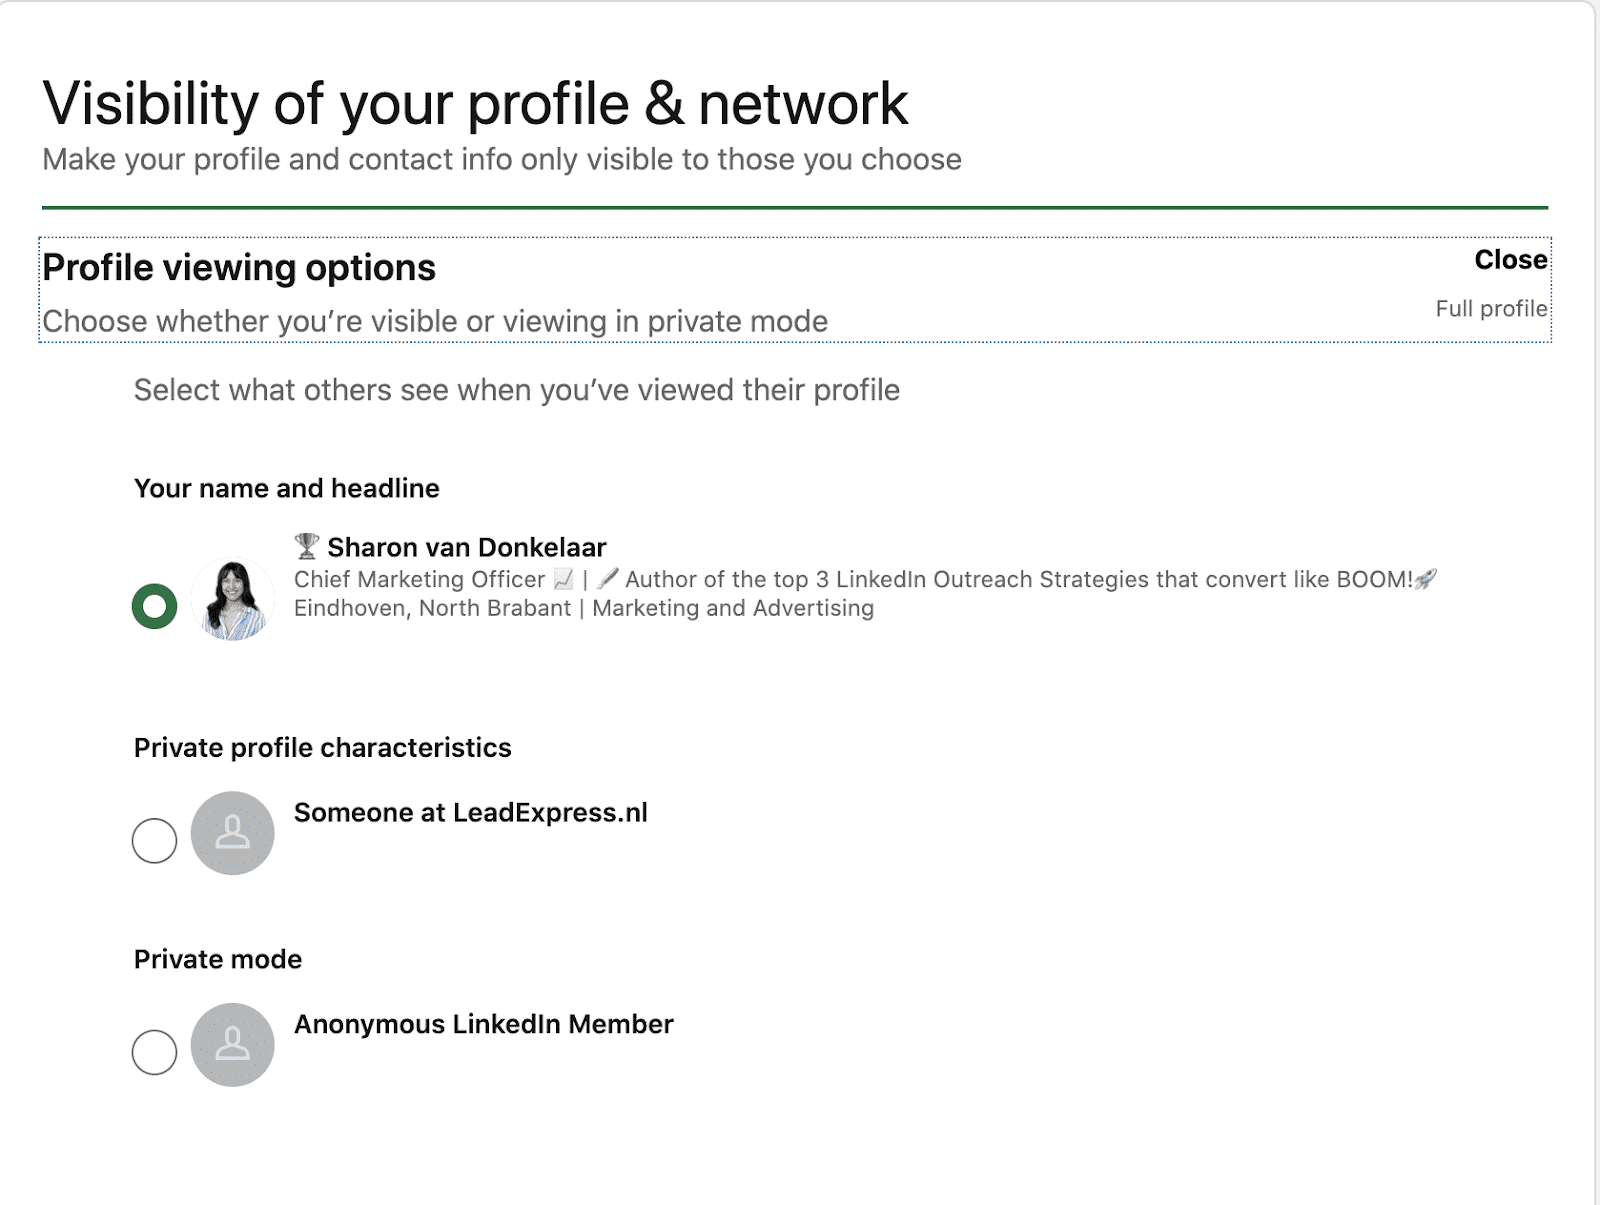 Linkedin says this profile is not available